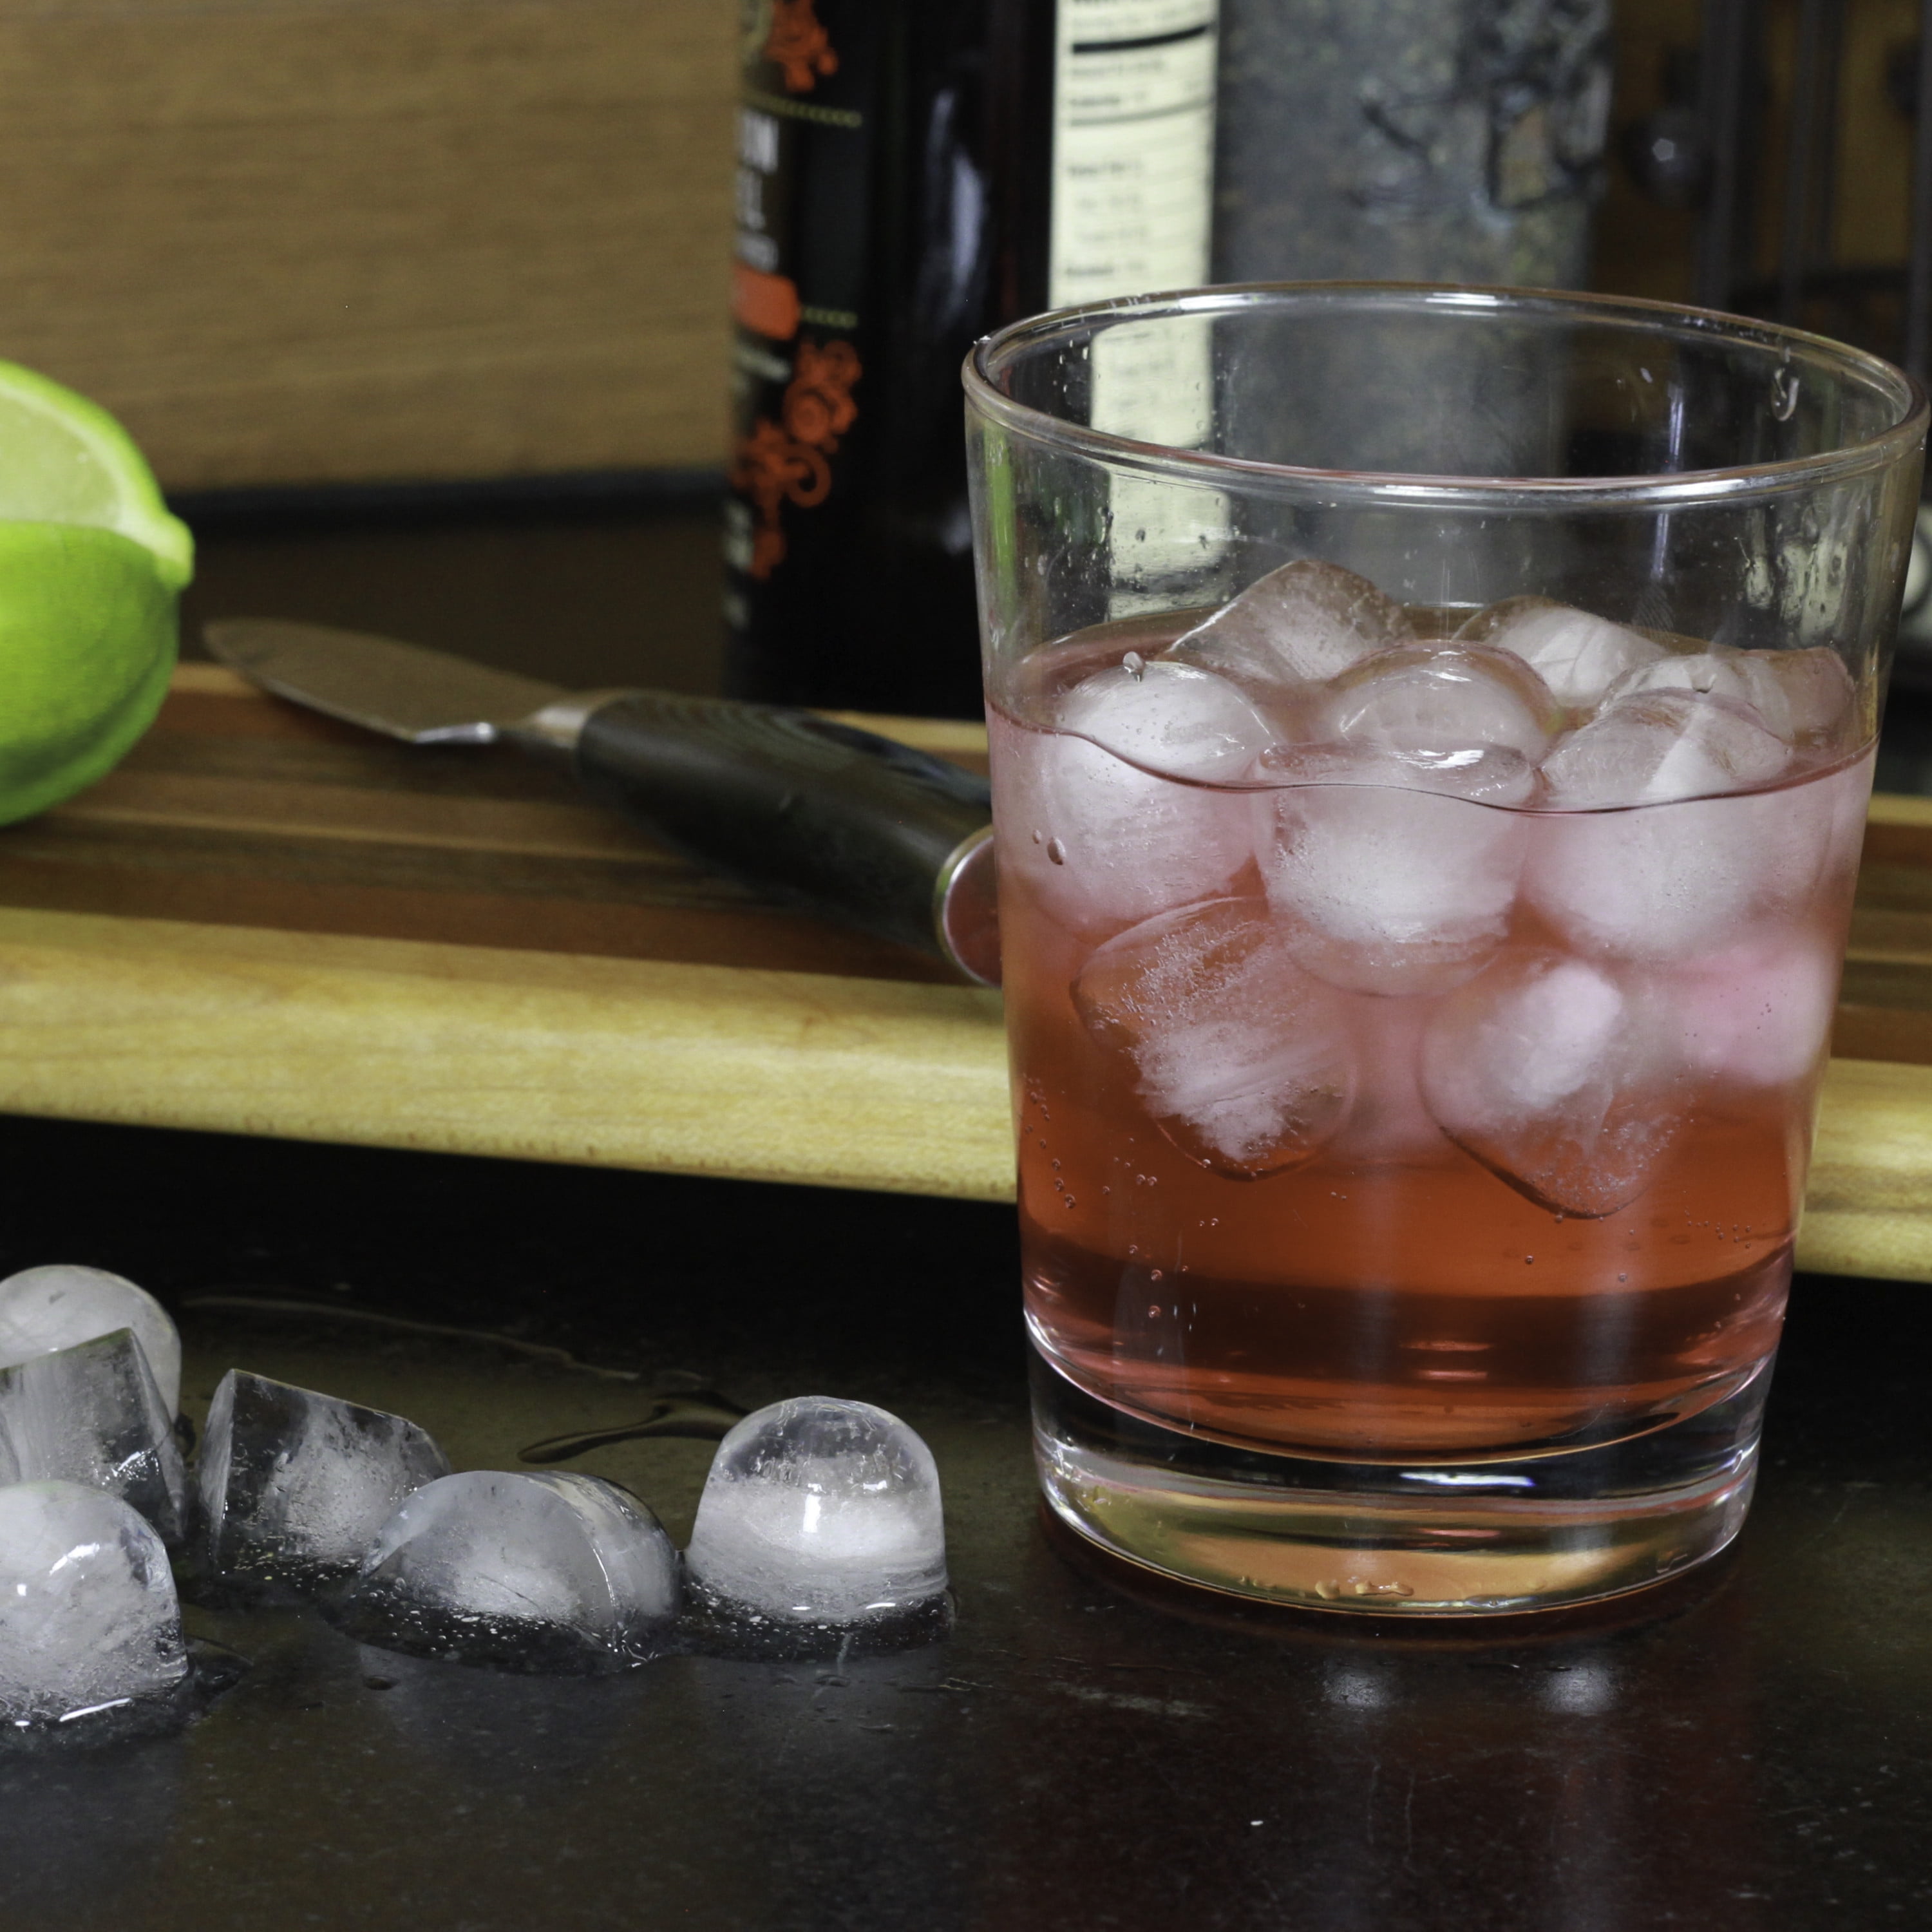 ICE CUBE TRAY - SS - LARGE CUBES – Mrs. Robinson's Tea Shop